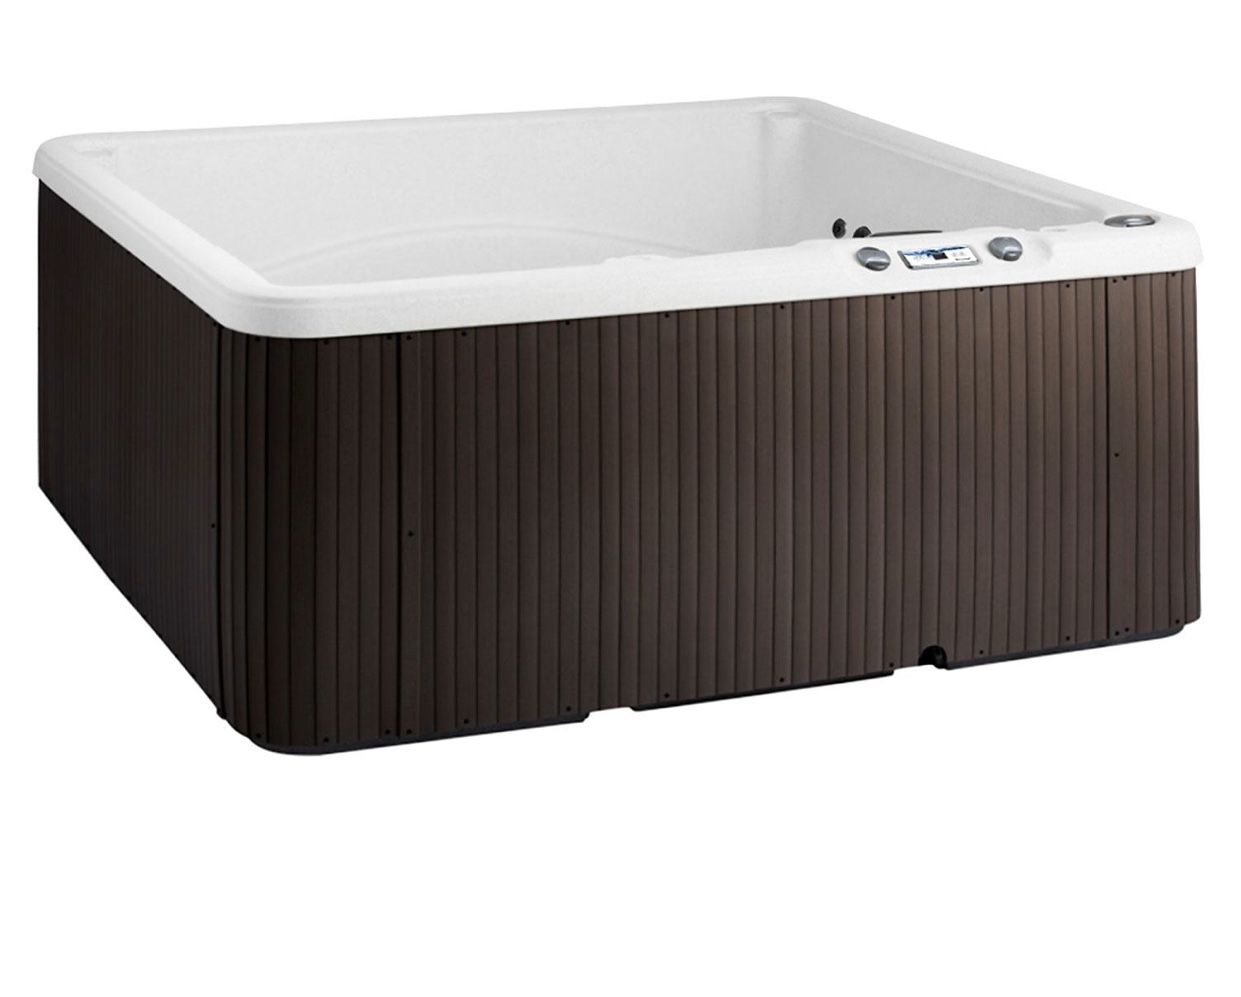 LifeSmart Spa/Hot Tub 5 person 28 jets with LED lights